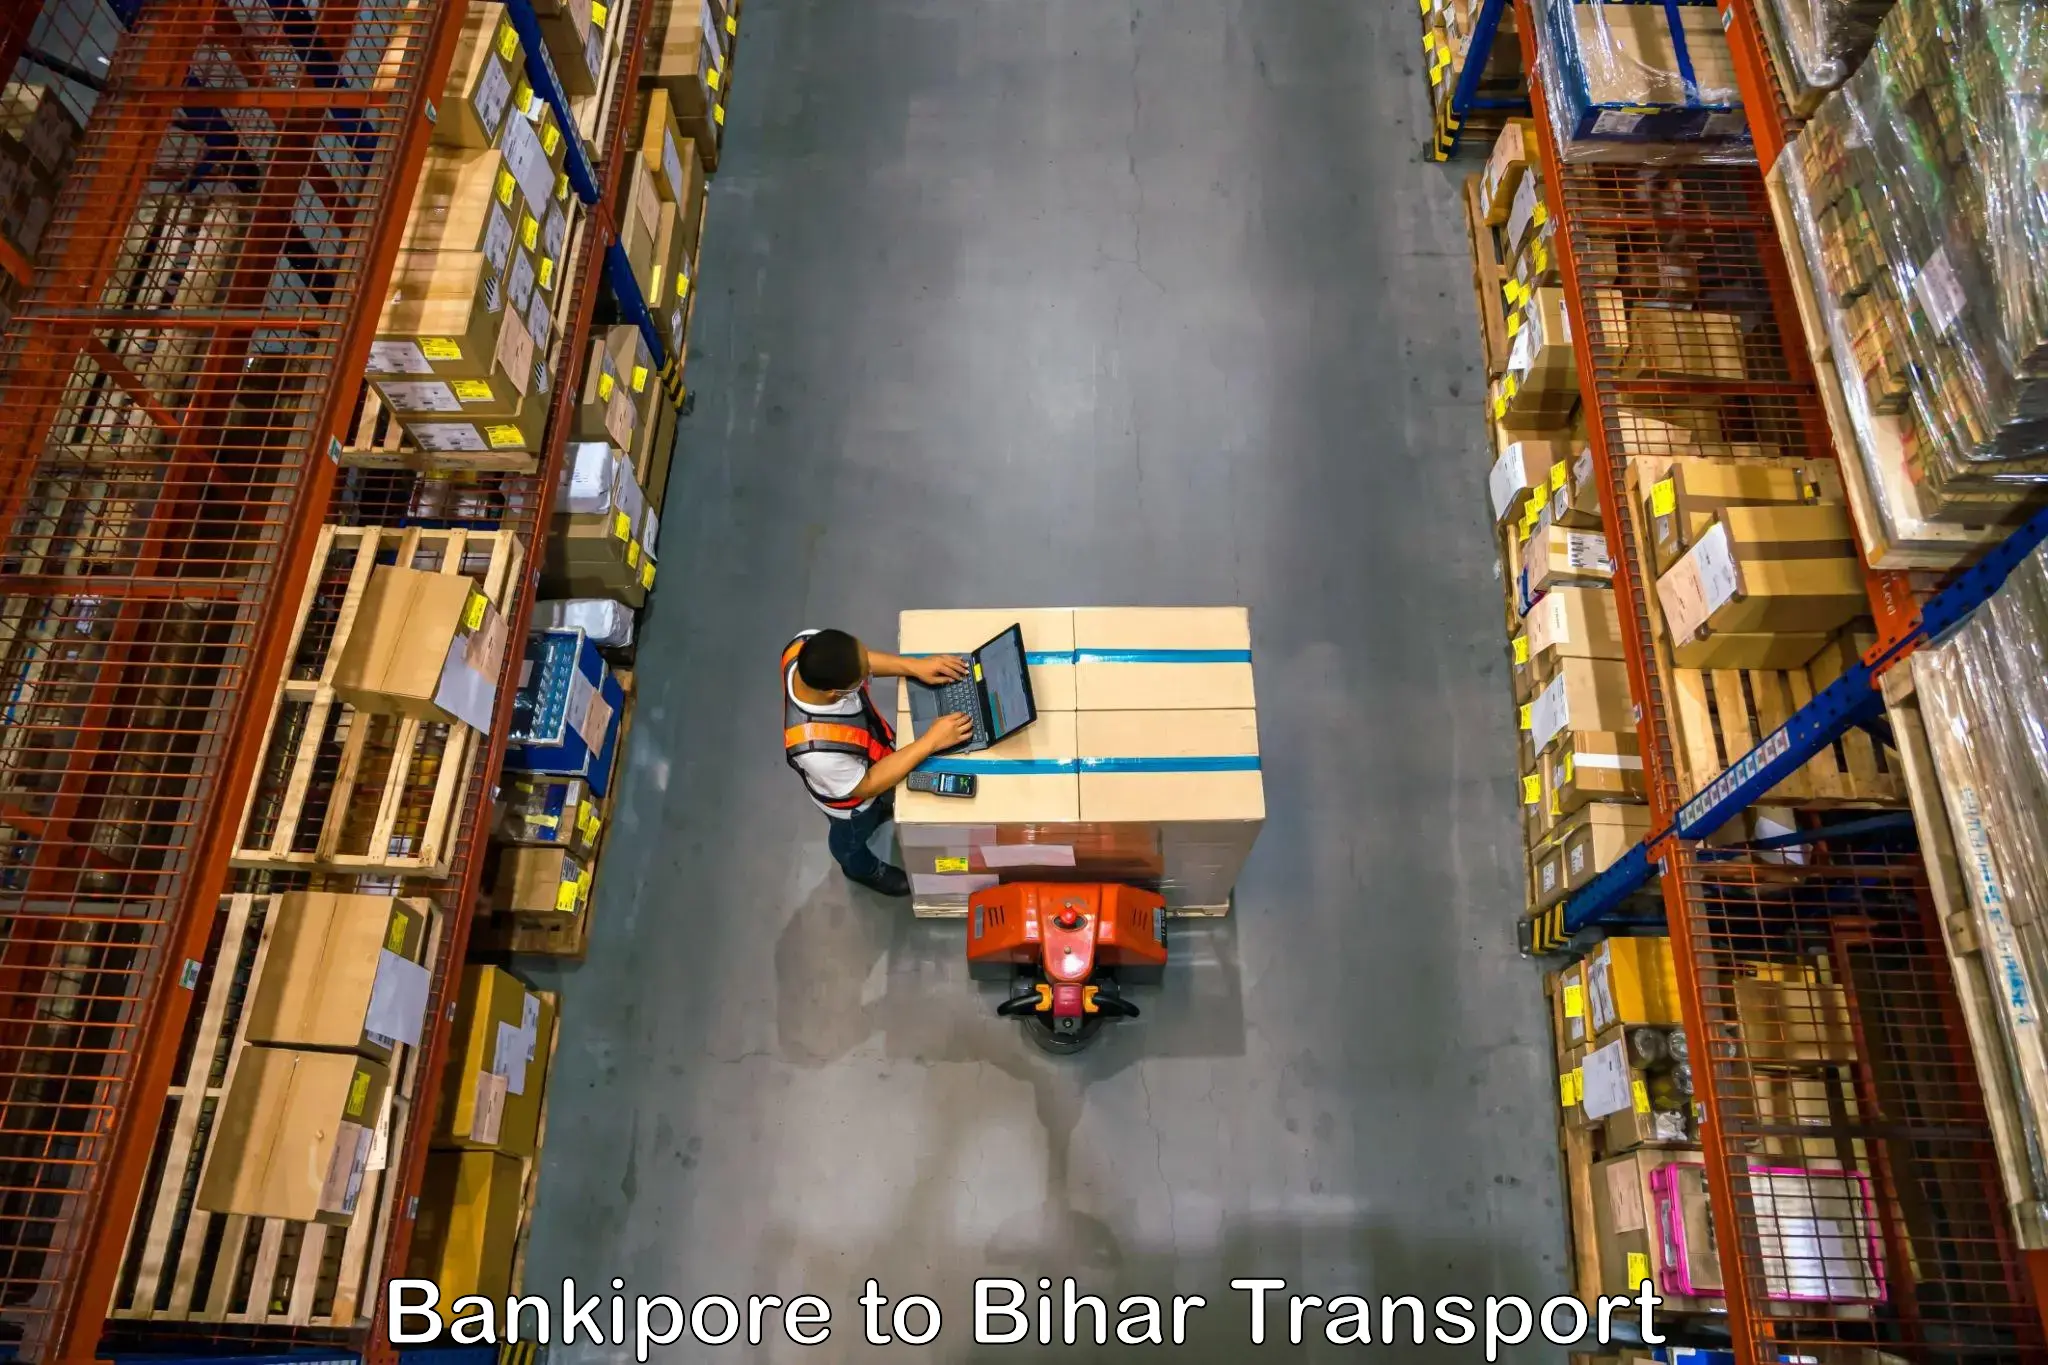 Container transport service Bankipore to Chakai